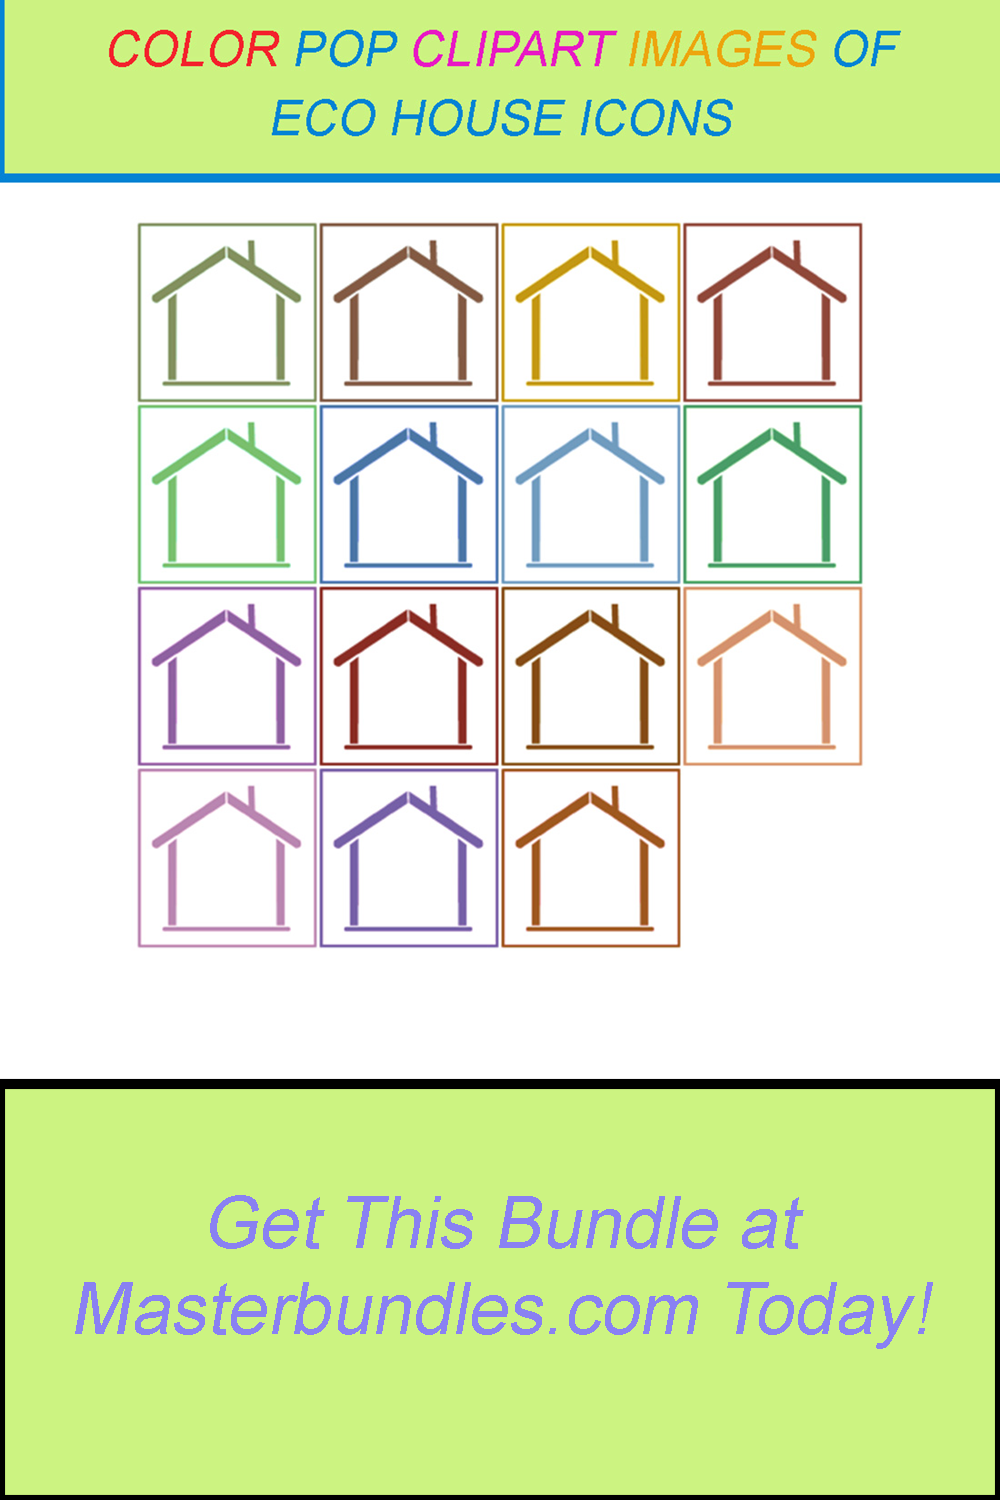 15 COLOR POP CLIPART IMAGES OF ECO HOUSE ICONS pinterest preview image.